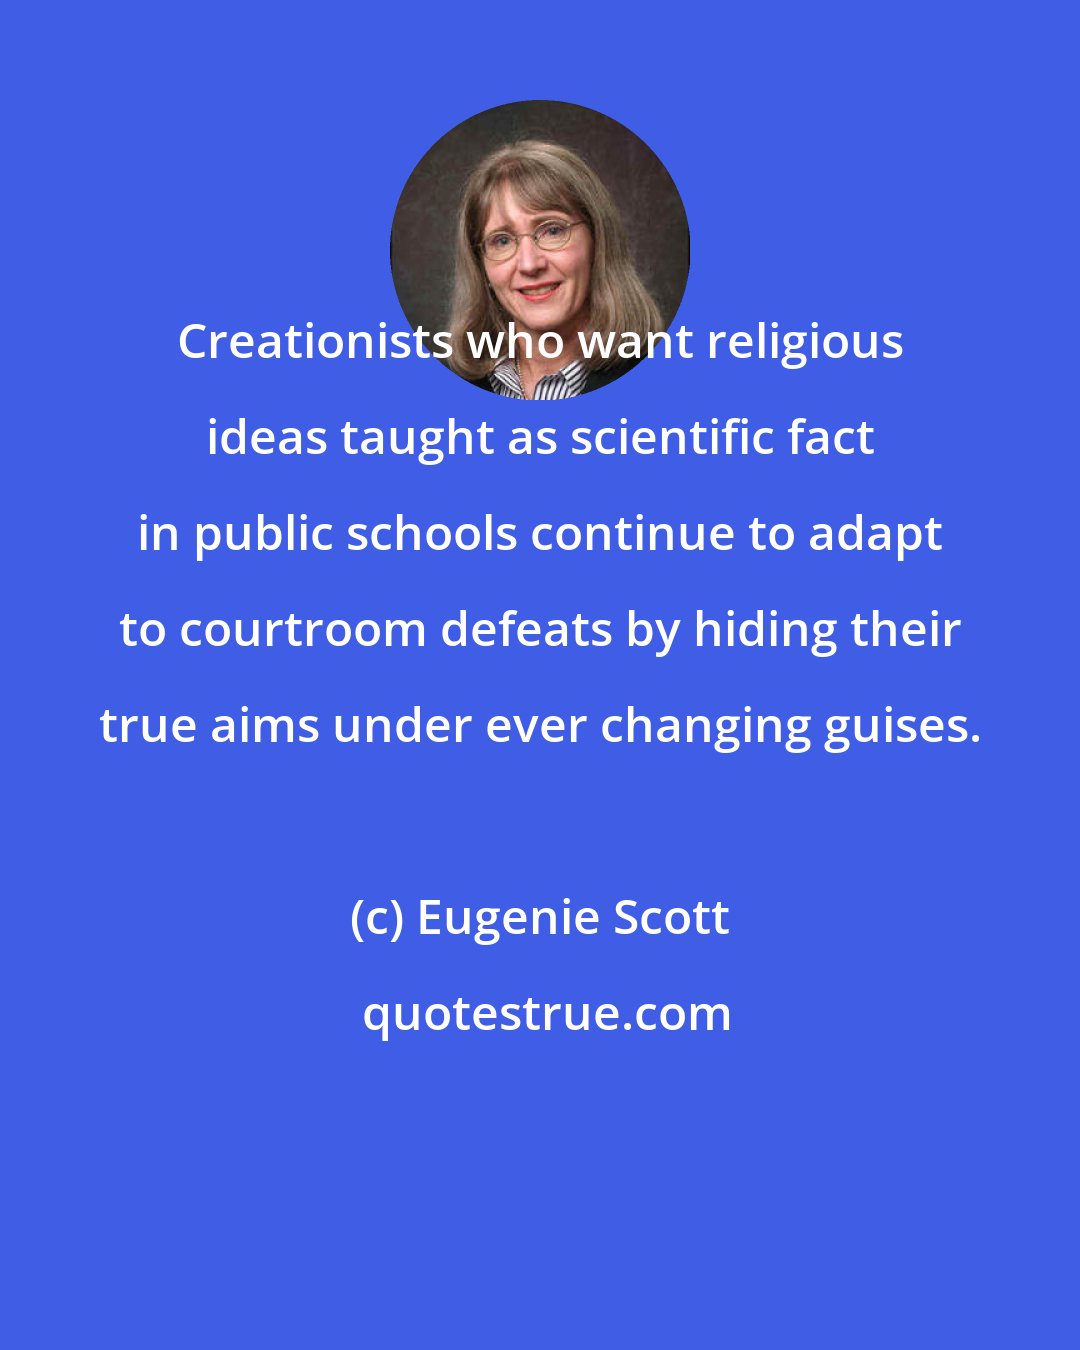 Eugenie Scott: Creationists who want religious ideas taught as scientific fact in public schools continue to adapt to courtroom defeats by hiding their true aims under ever changing guises.